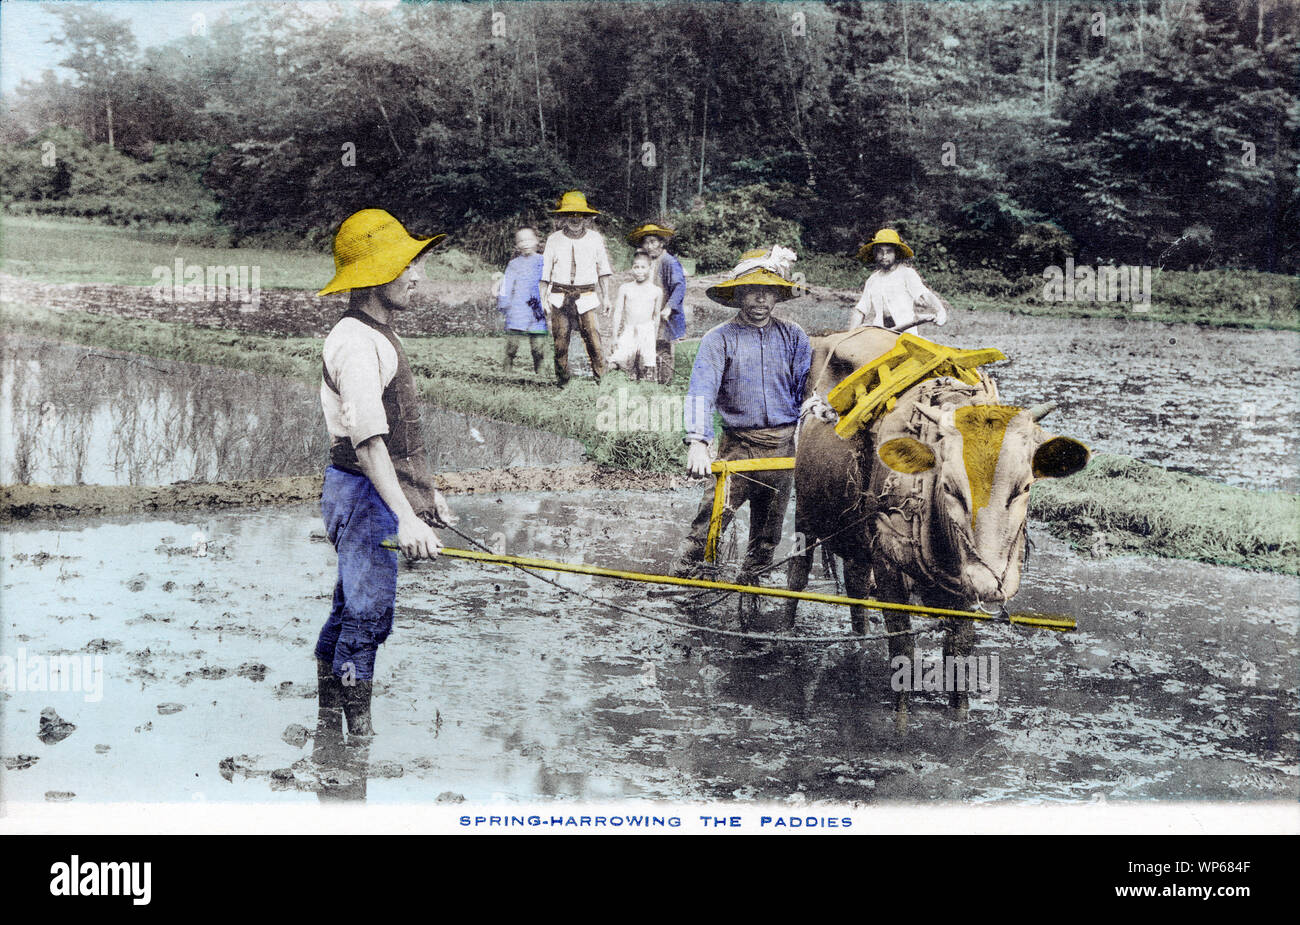 [ 1920s Japan - Japanese Farmers Plowing a Rice Field ] —   Farmers working in a rice field. Interestingly, they are all wearing Western-style clothes.  This postcard is from a series about Japanese farming, called Farmer Life in Japan.  20th century vintage postcard. Stock Photo